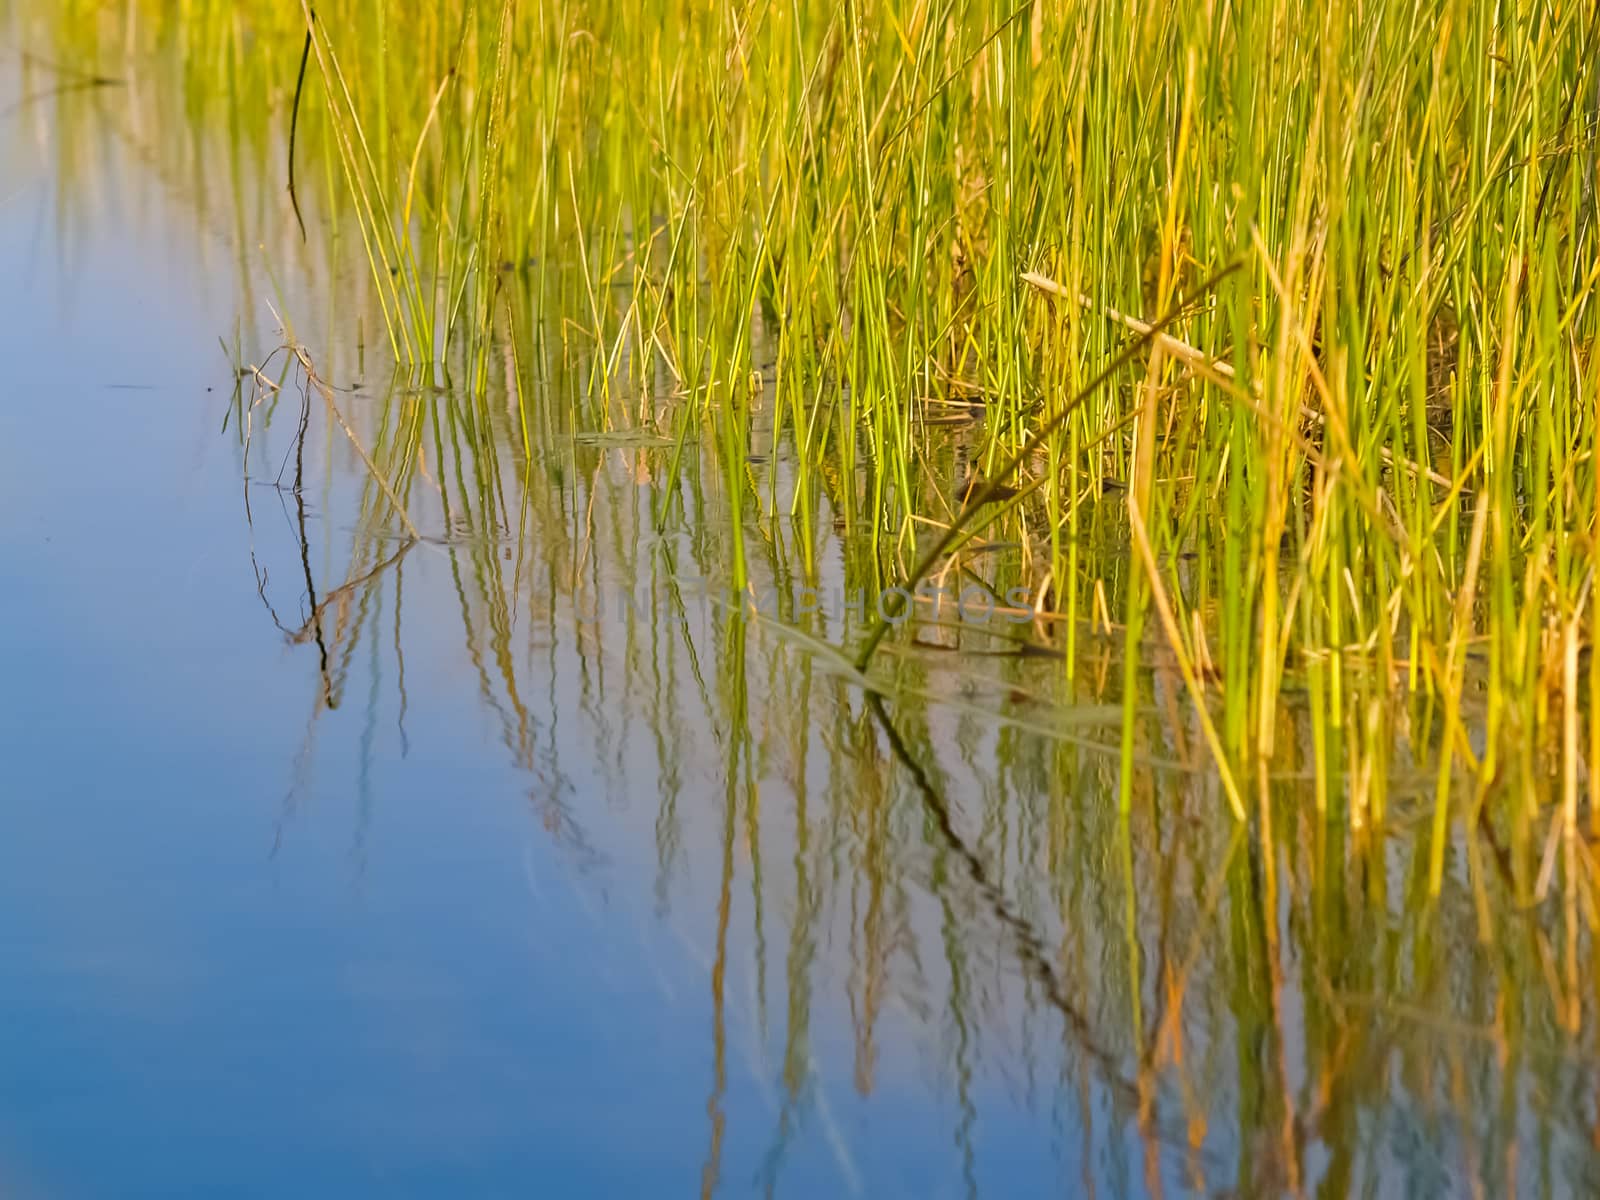 Environmental bright greens of swamp reeds against clear blue wa by brians101